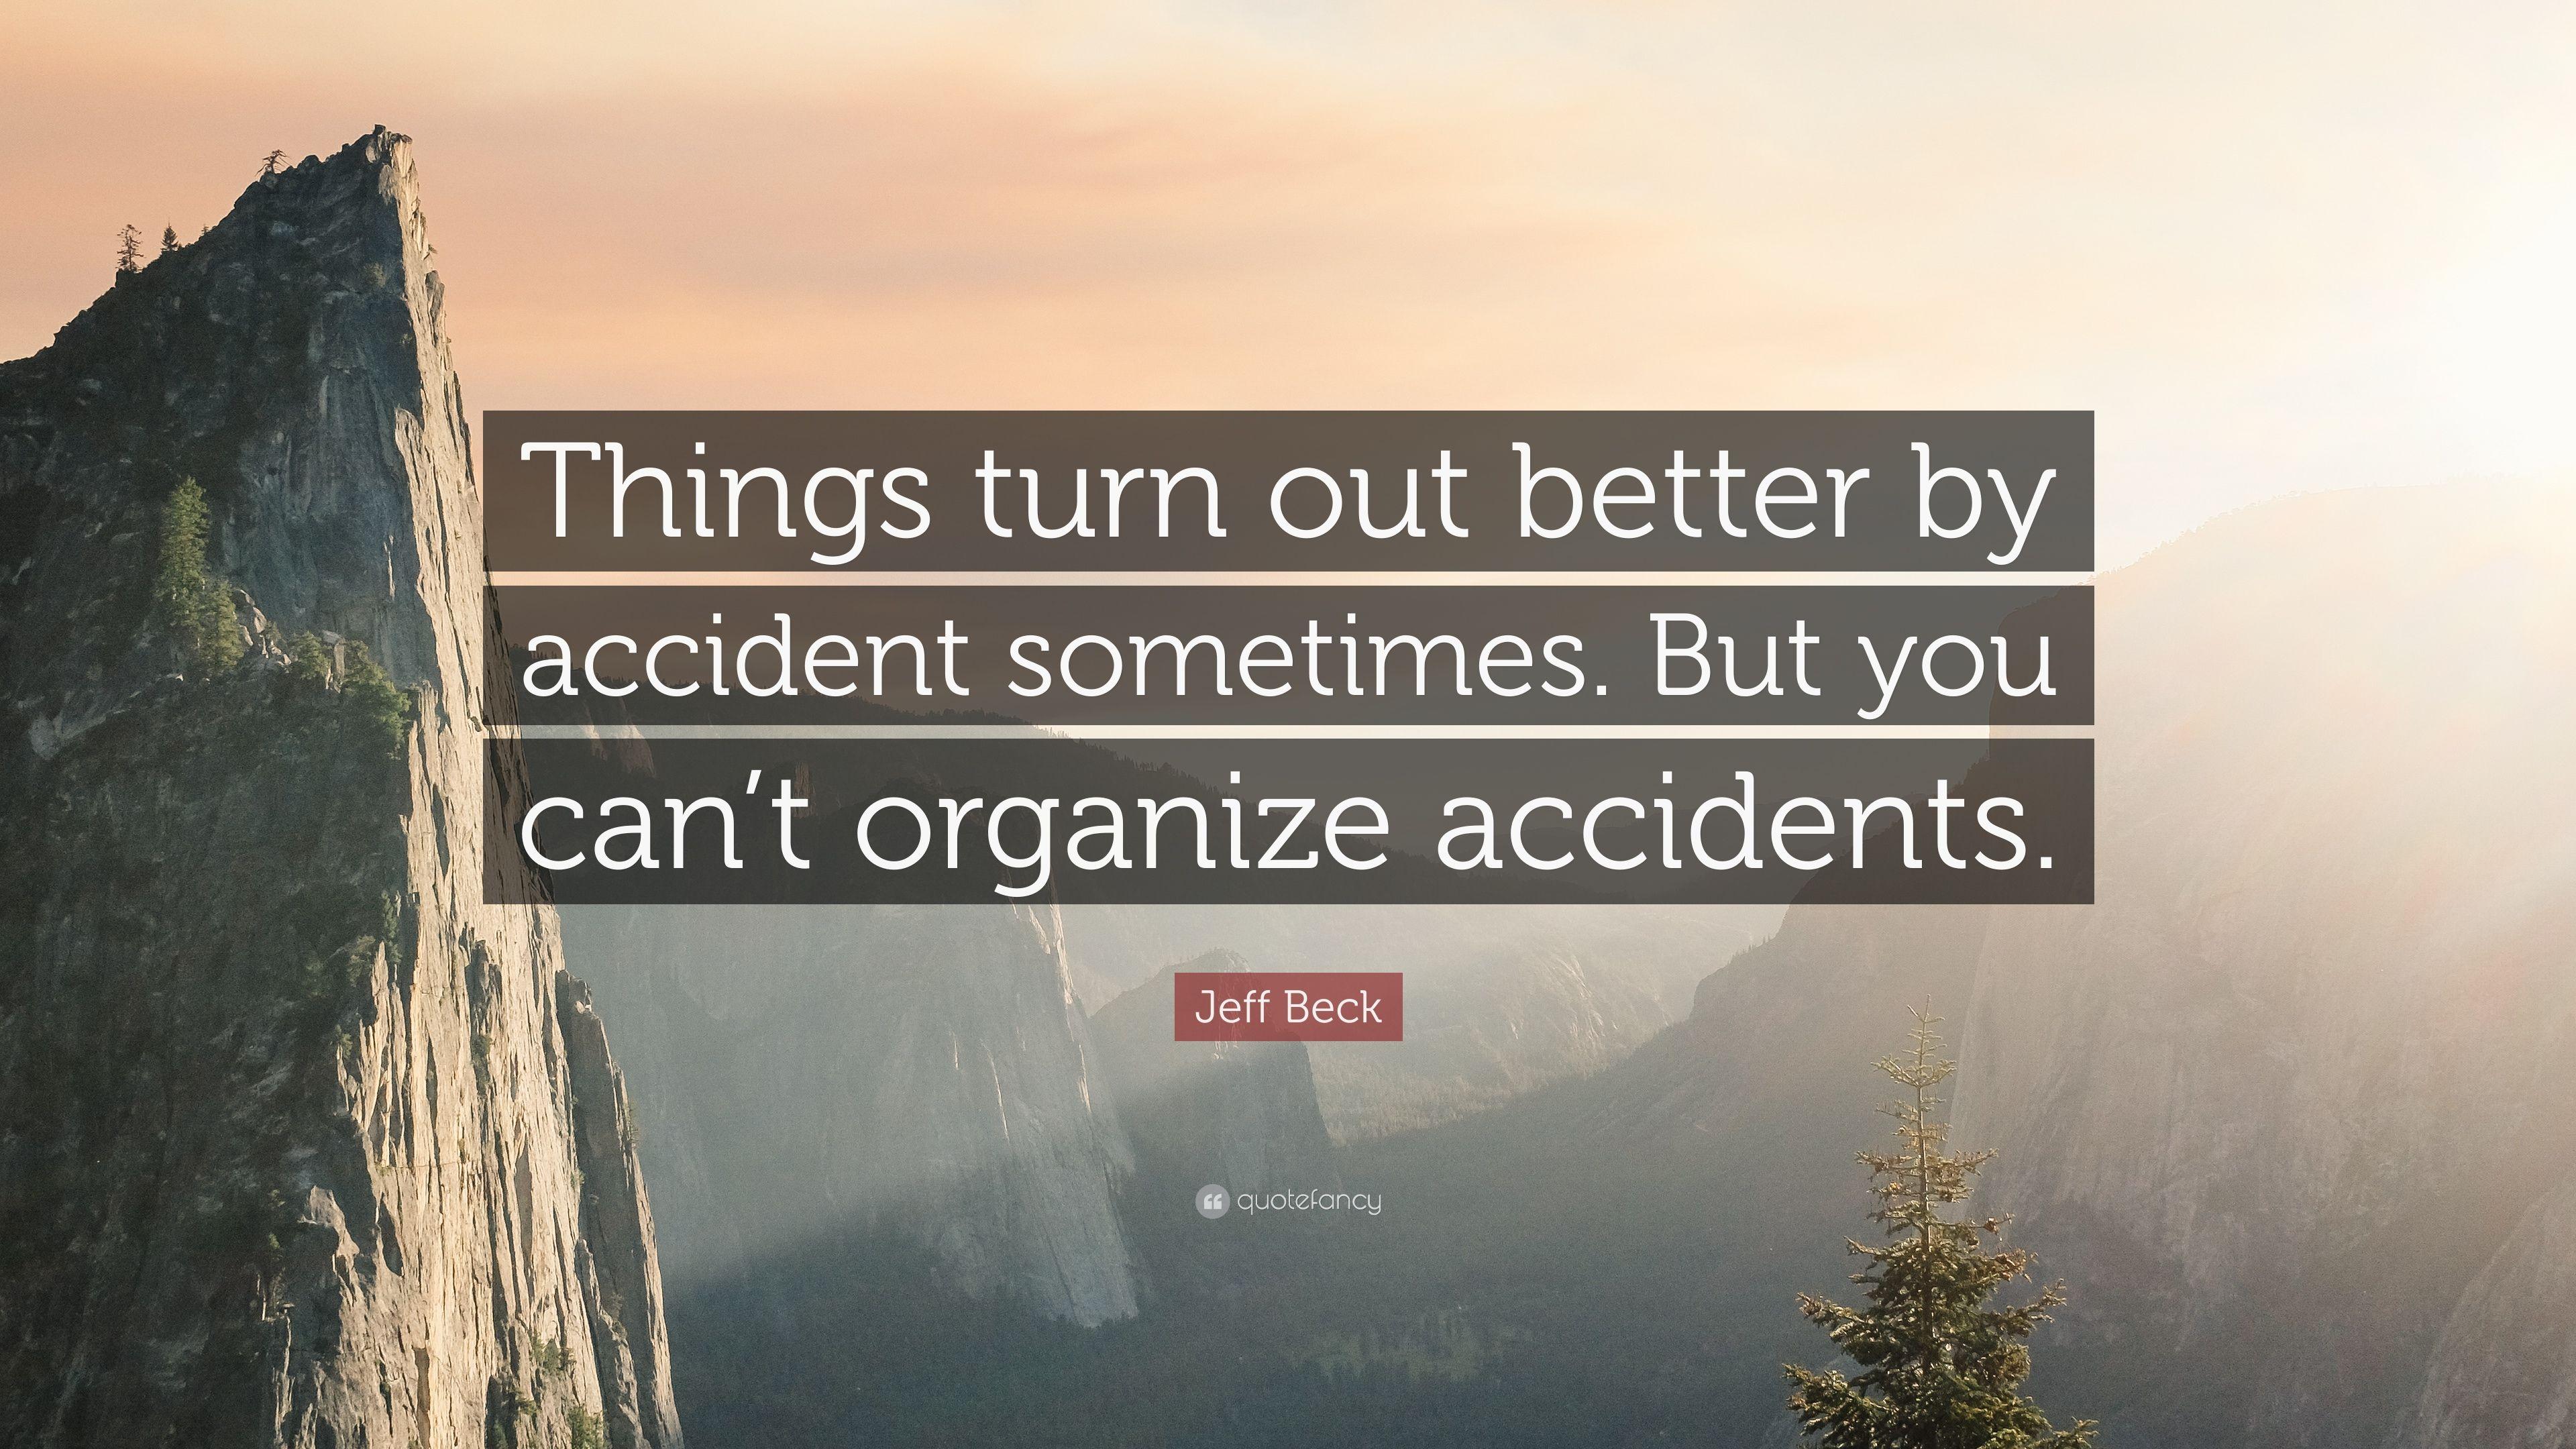 Jeff Beck Quote: “Things turn out better by accident sometimes. But